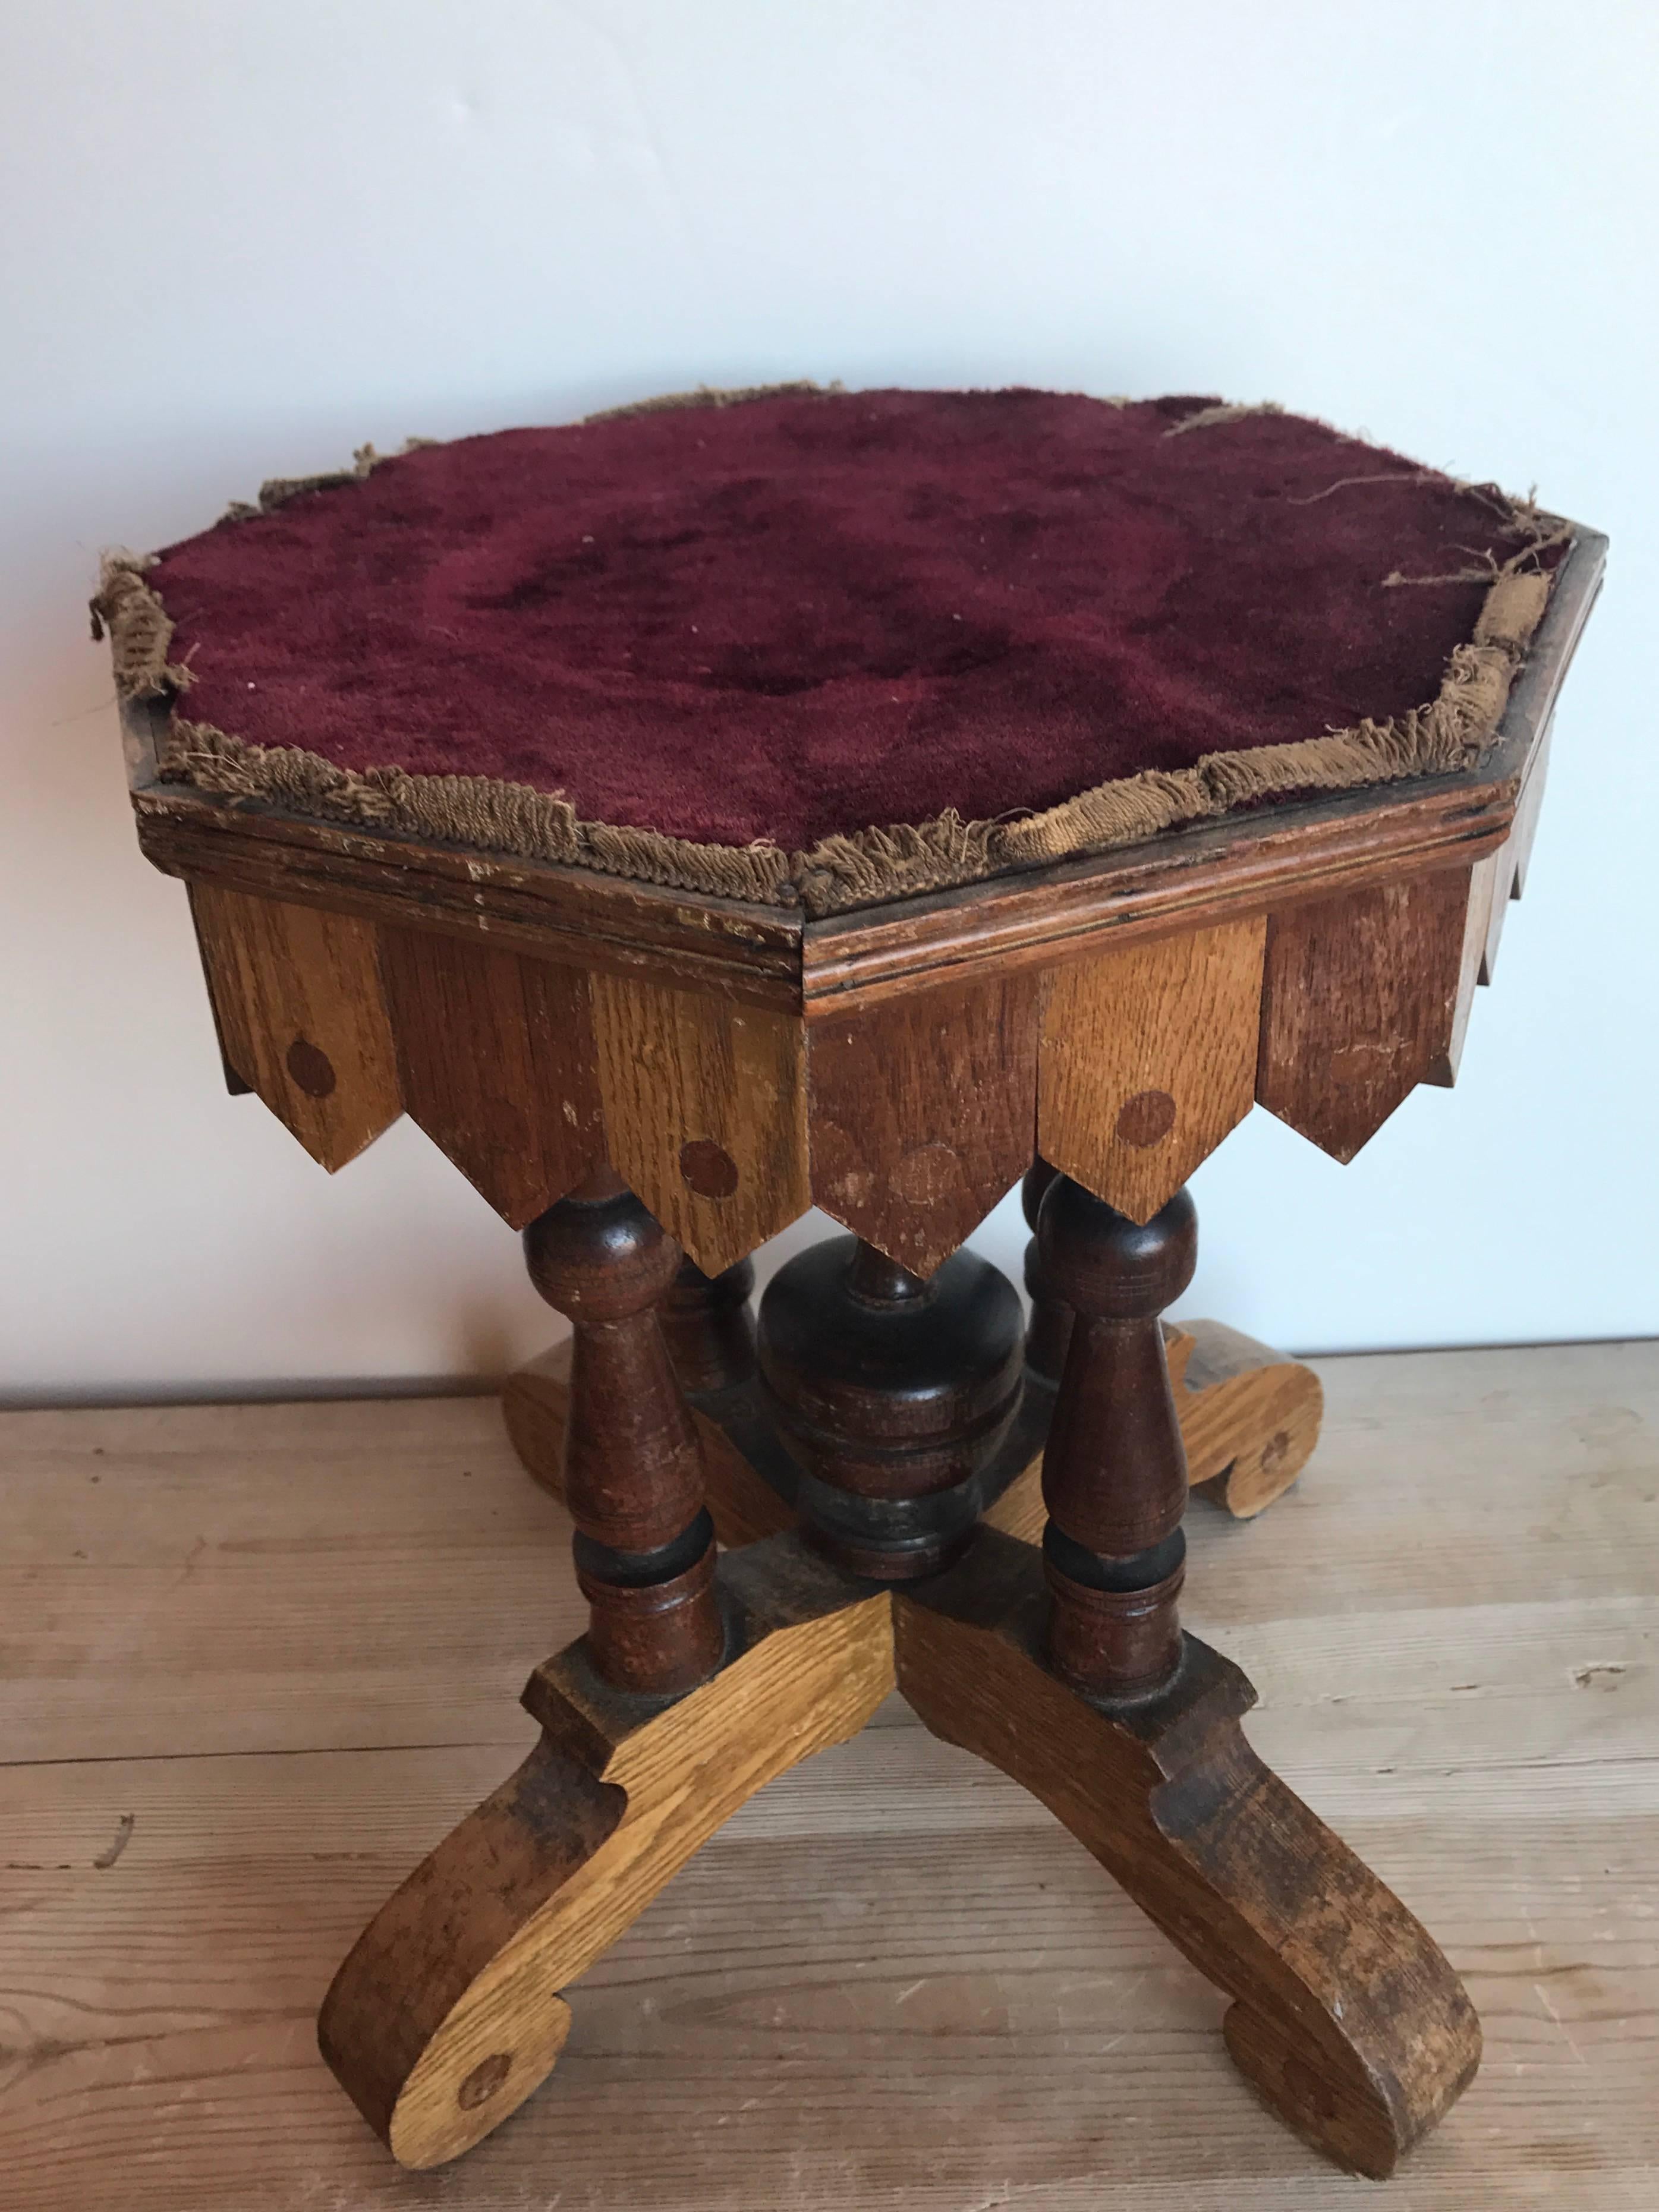 19th century Victorian table with velvet top.